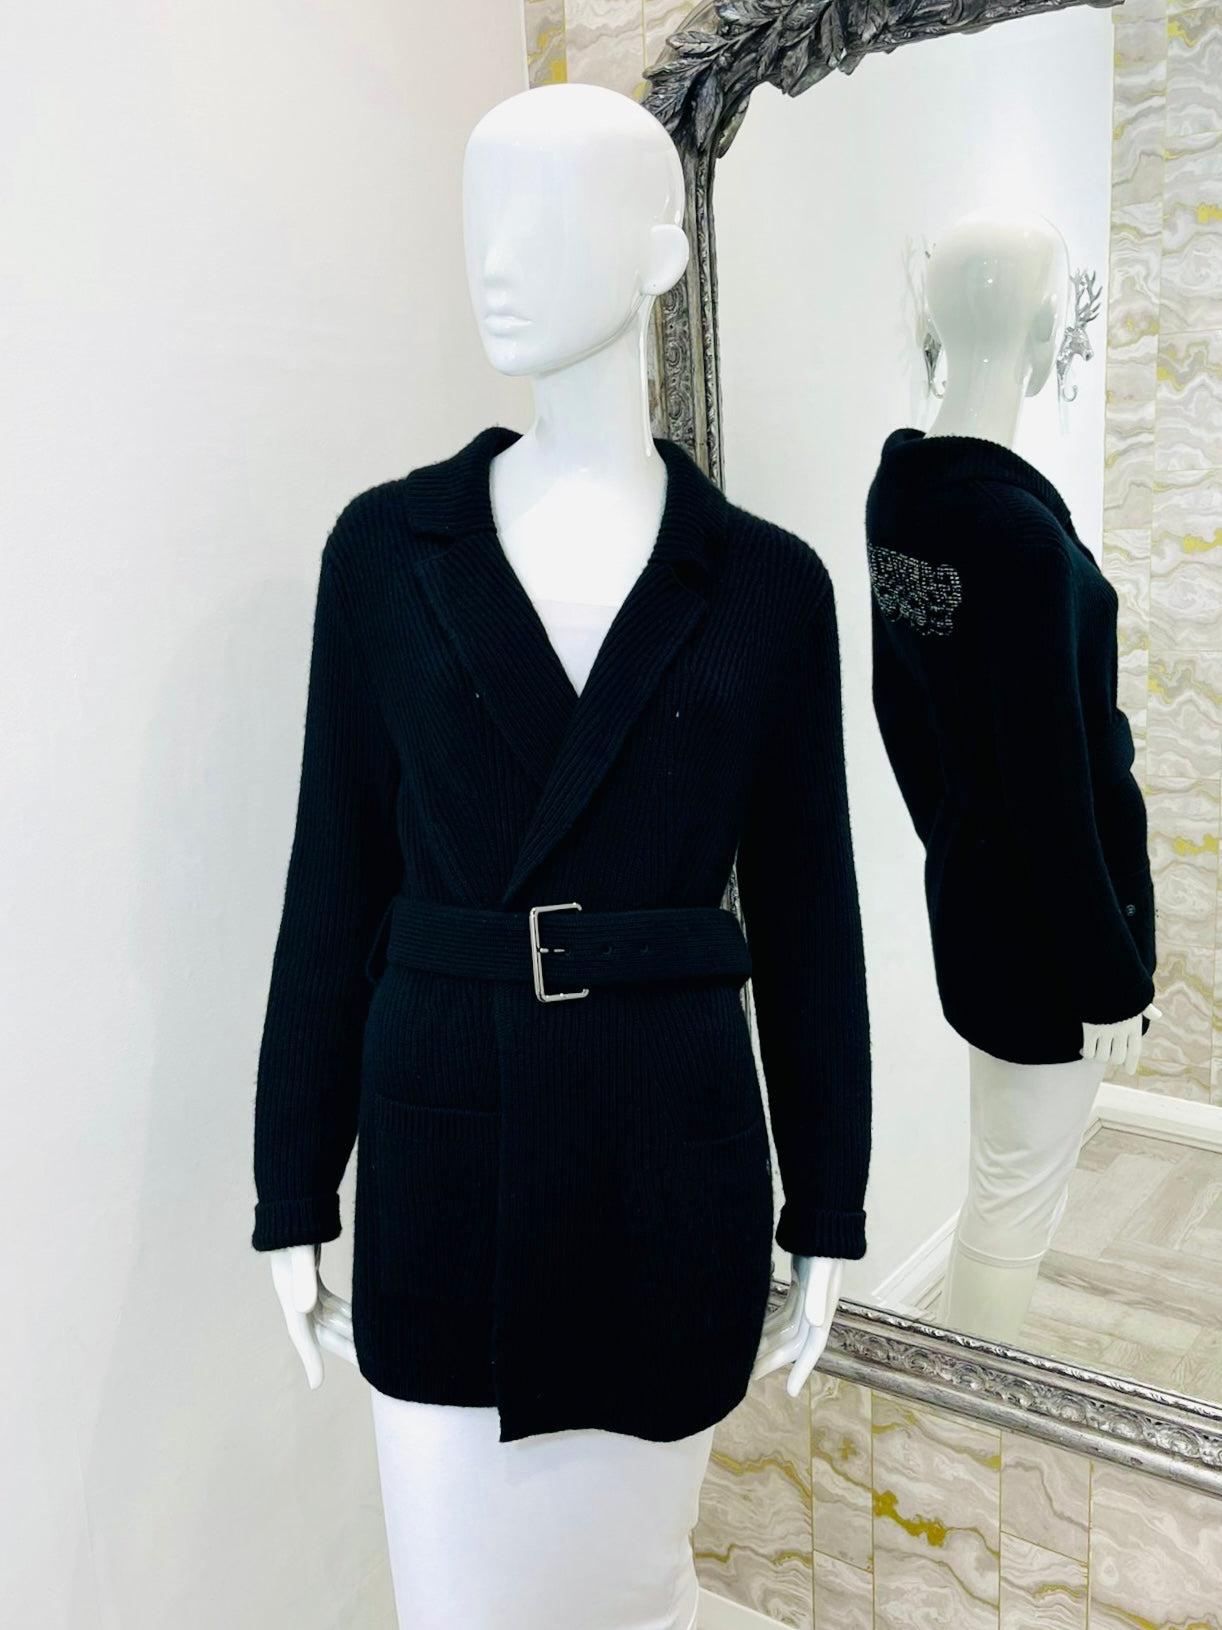 Chanel Cashmere Gabrielle Coco Cardi/Coat In Excellent Condition For Sale In London, GB